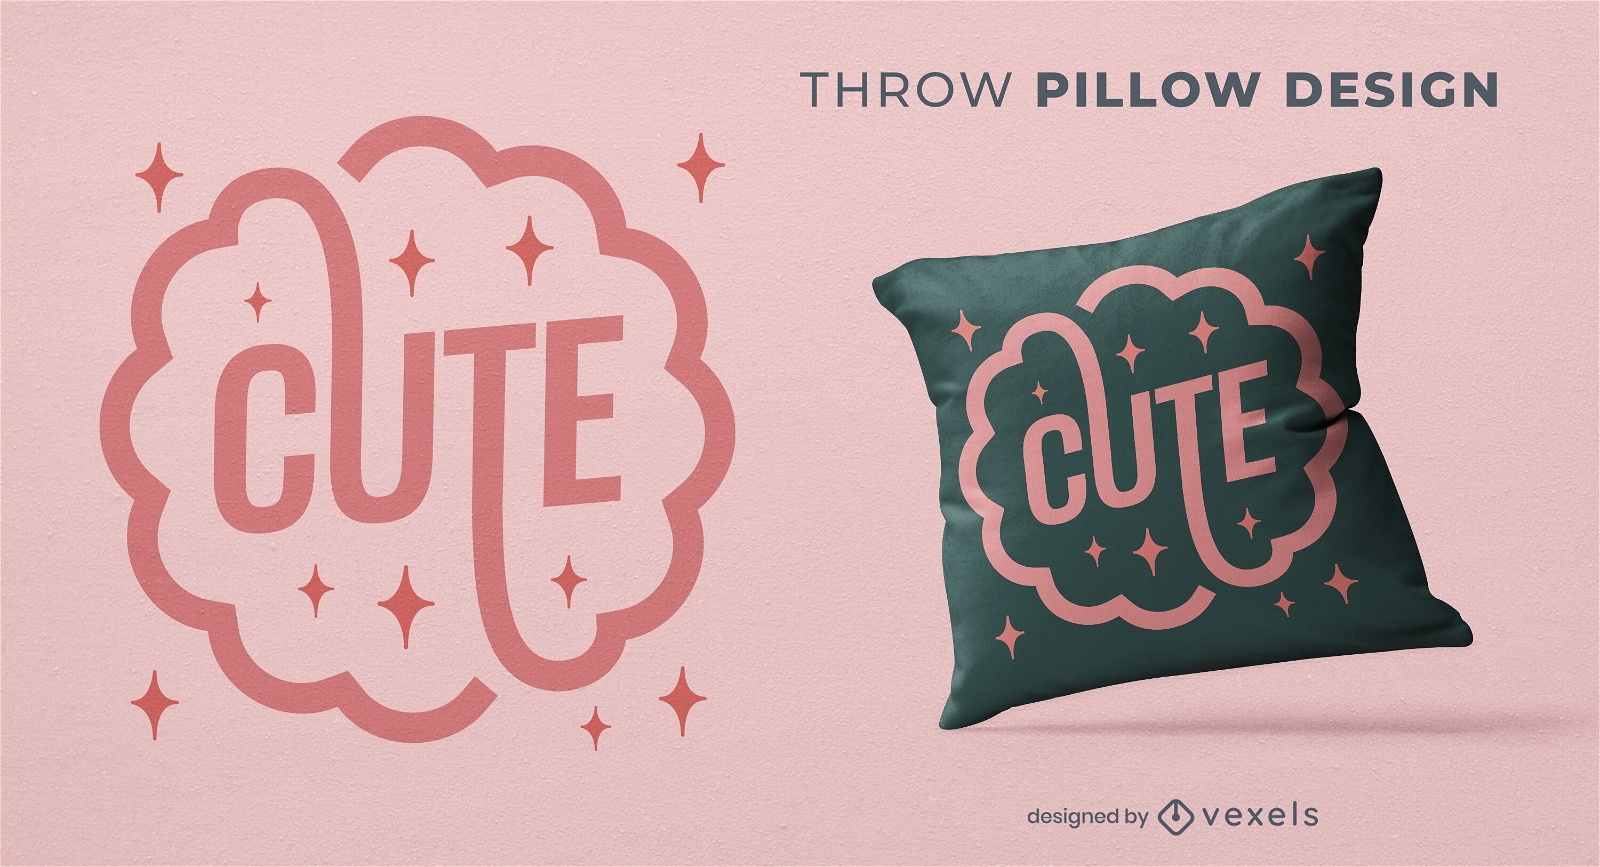 Cute letters throw pillow design